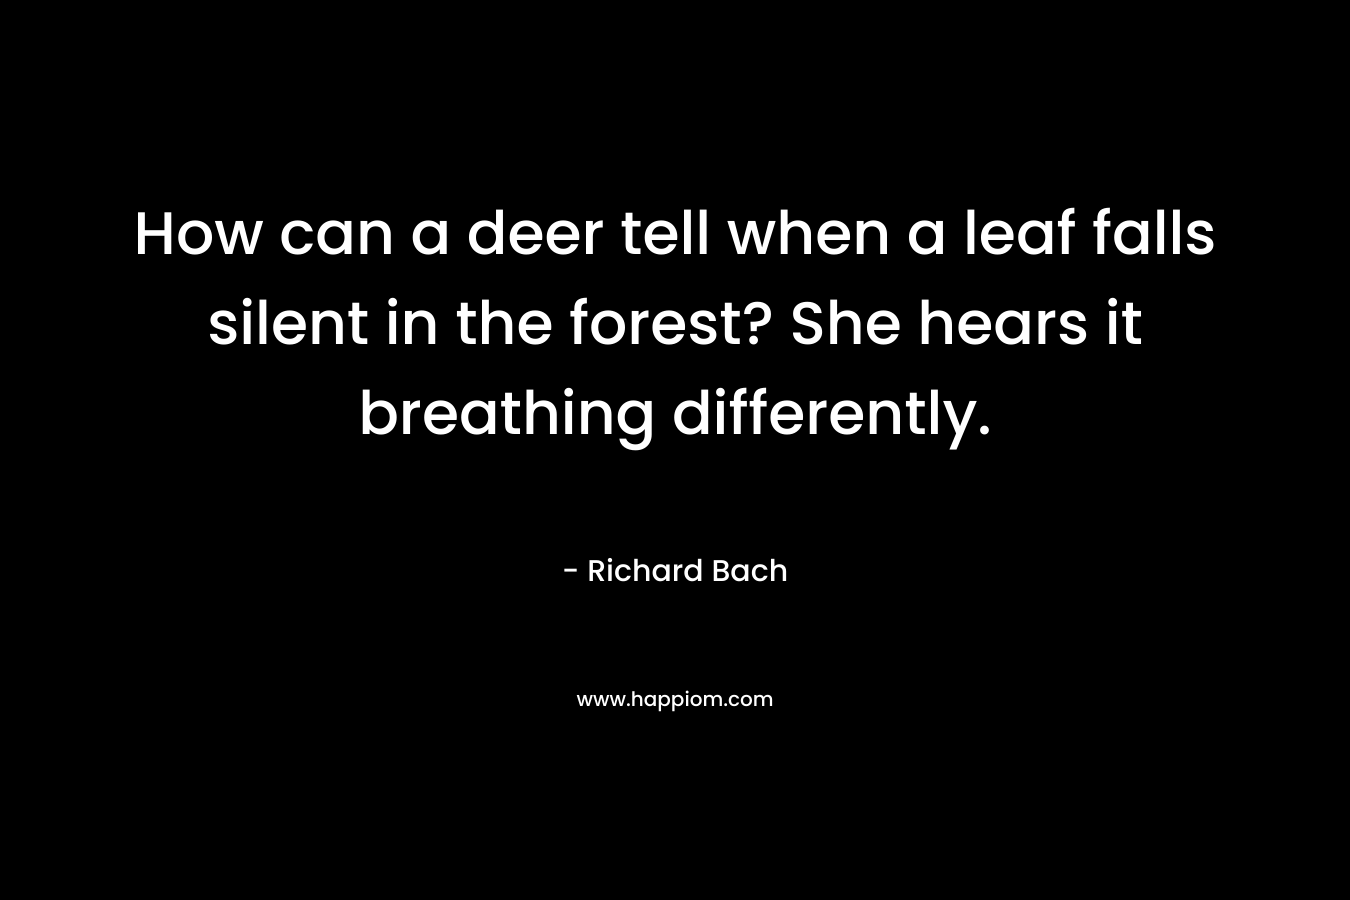 How can a deer tell when a leaf falls silent in the forest? She hears it breathing differently. – Richard Bach